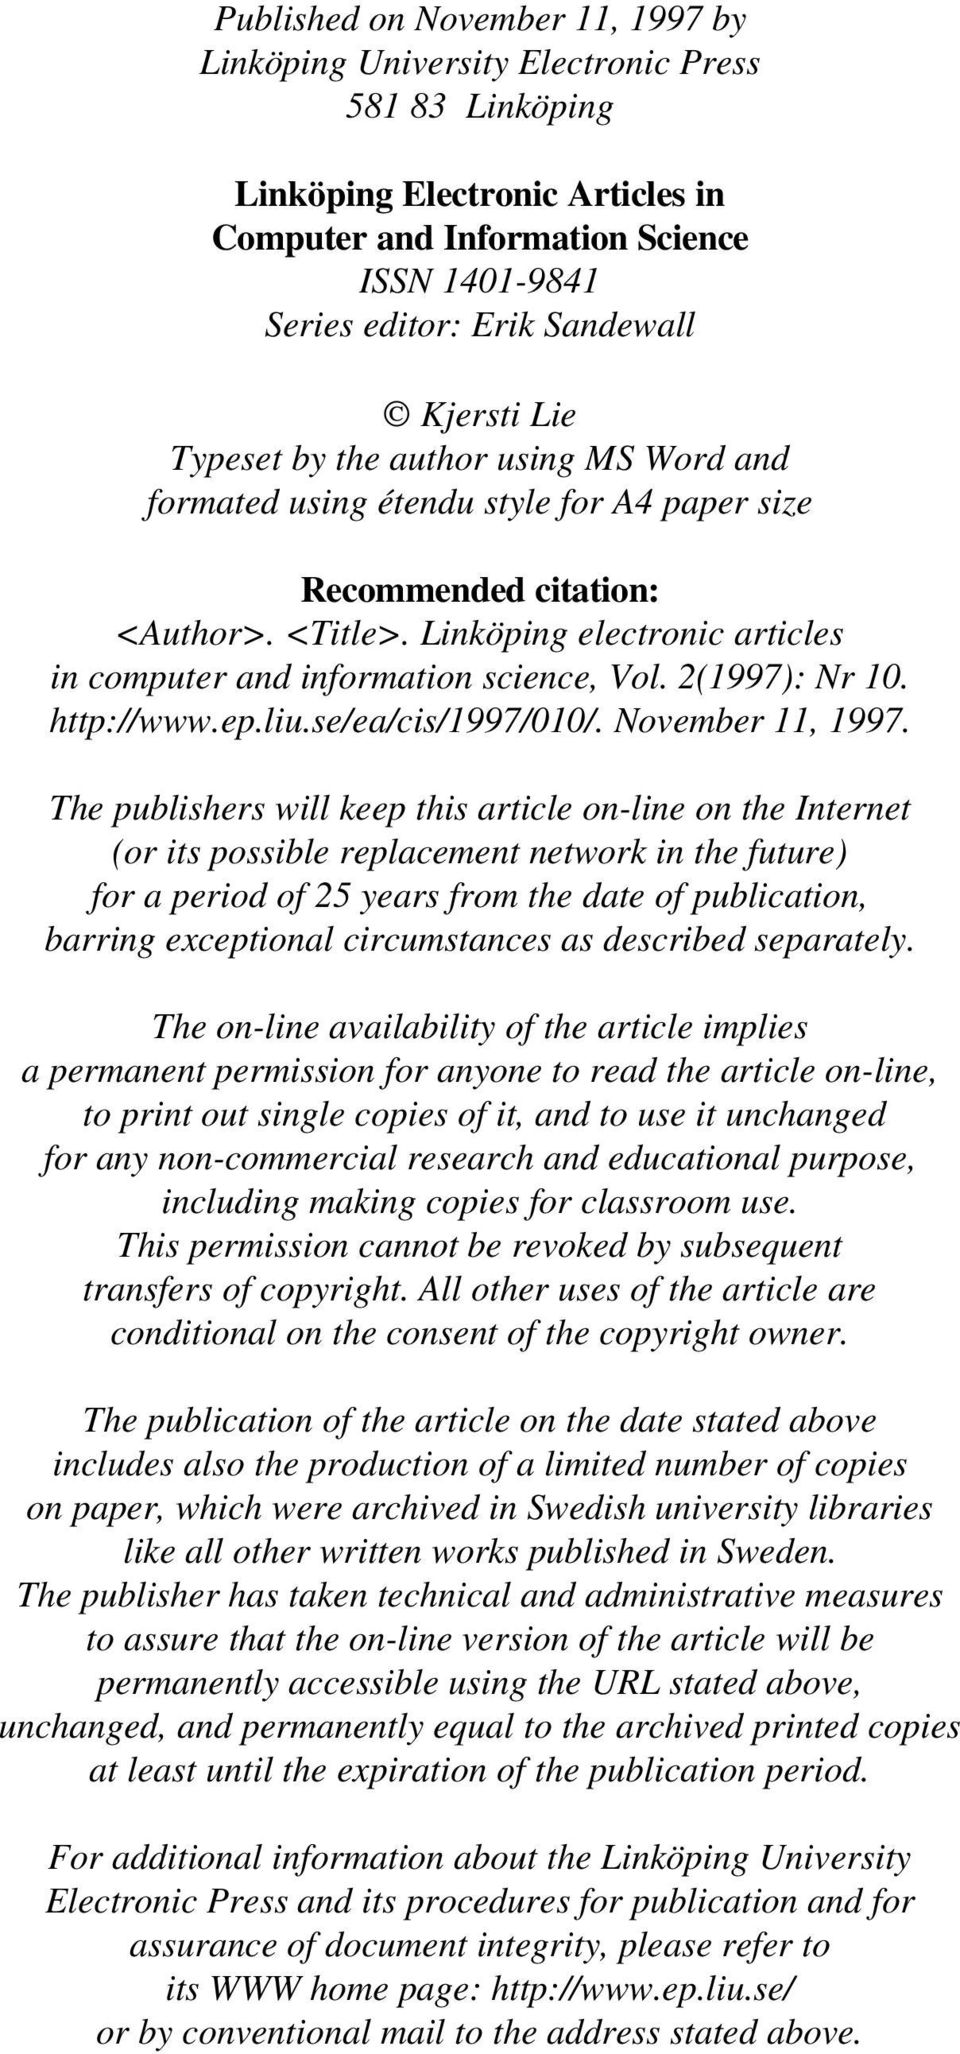 Linköping electronic articles in computer and information science, Vol. 2(1997): Nr 10. http://www.ep.liu.se/ea/cis/1997/010/. November 11, 1997.